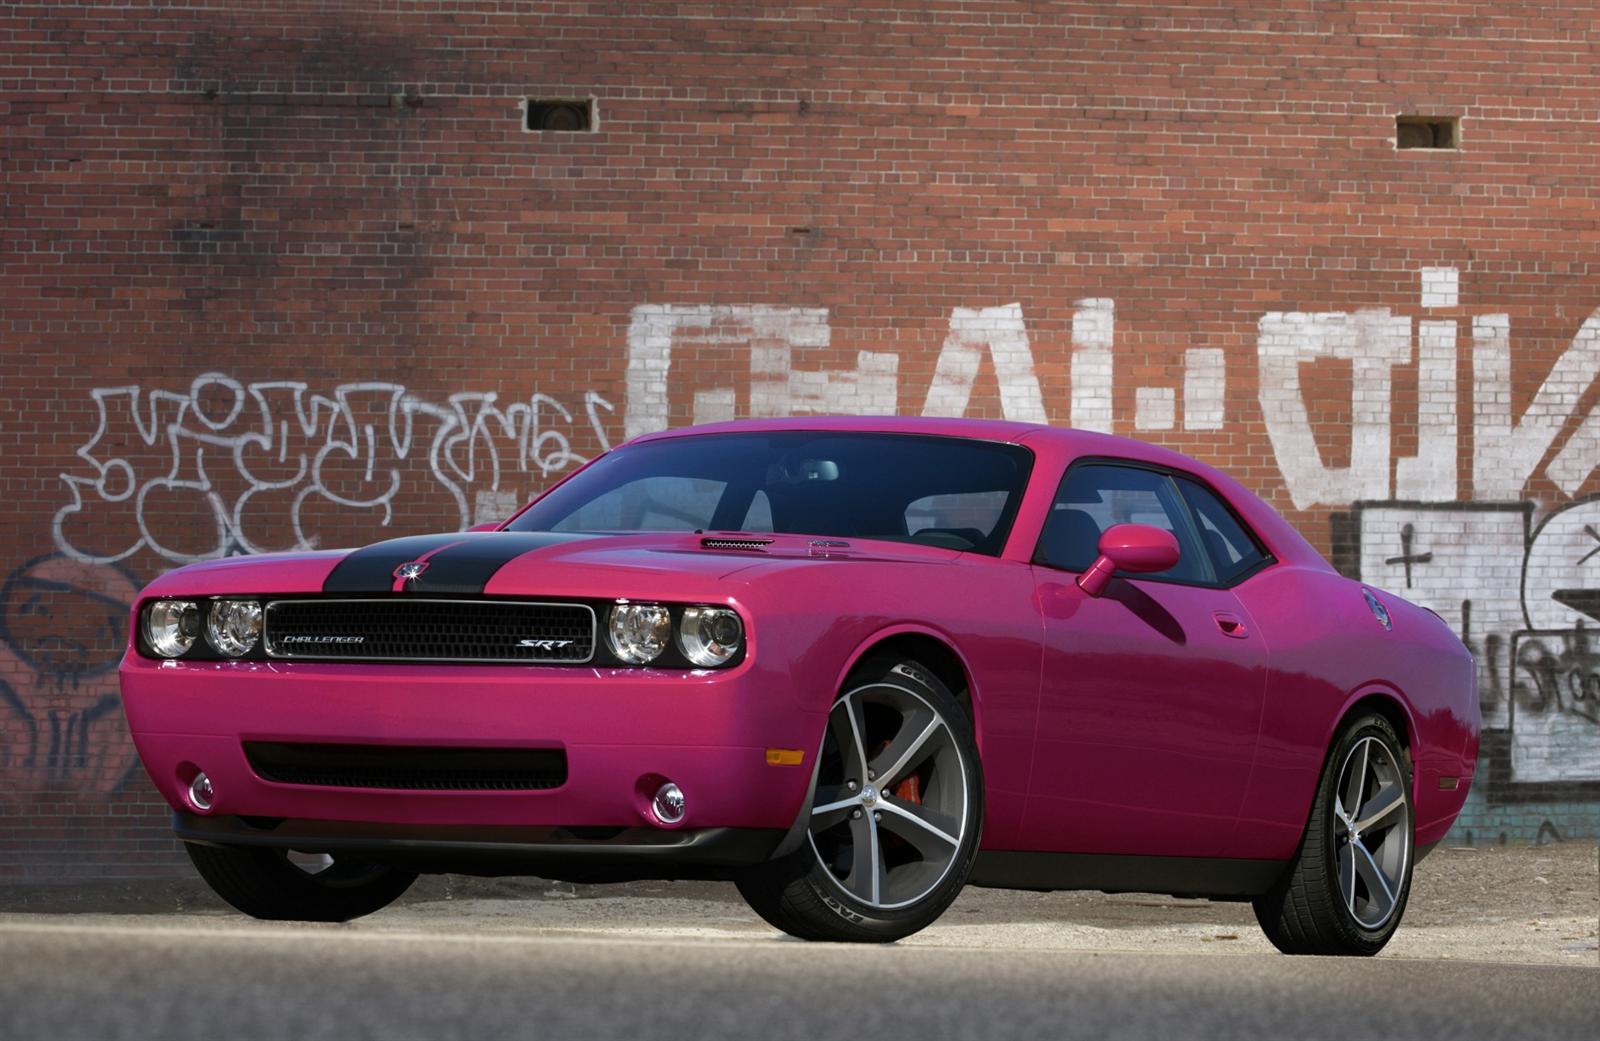 Menu items for the 2010 Dodge Challenger Furious Fuchsia Edition. 